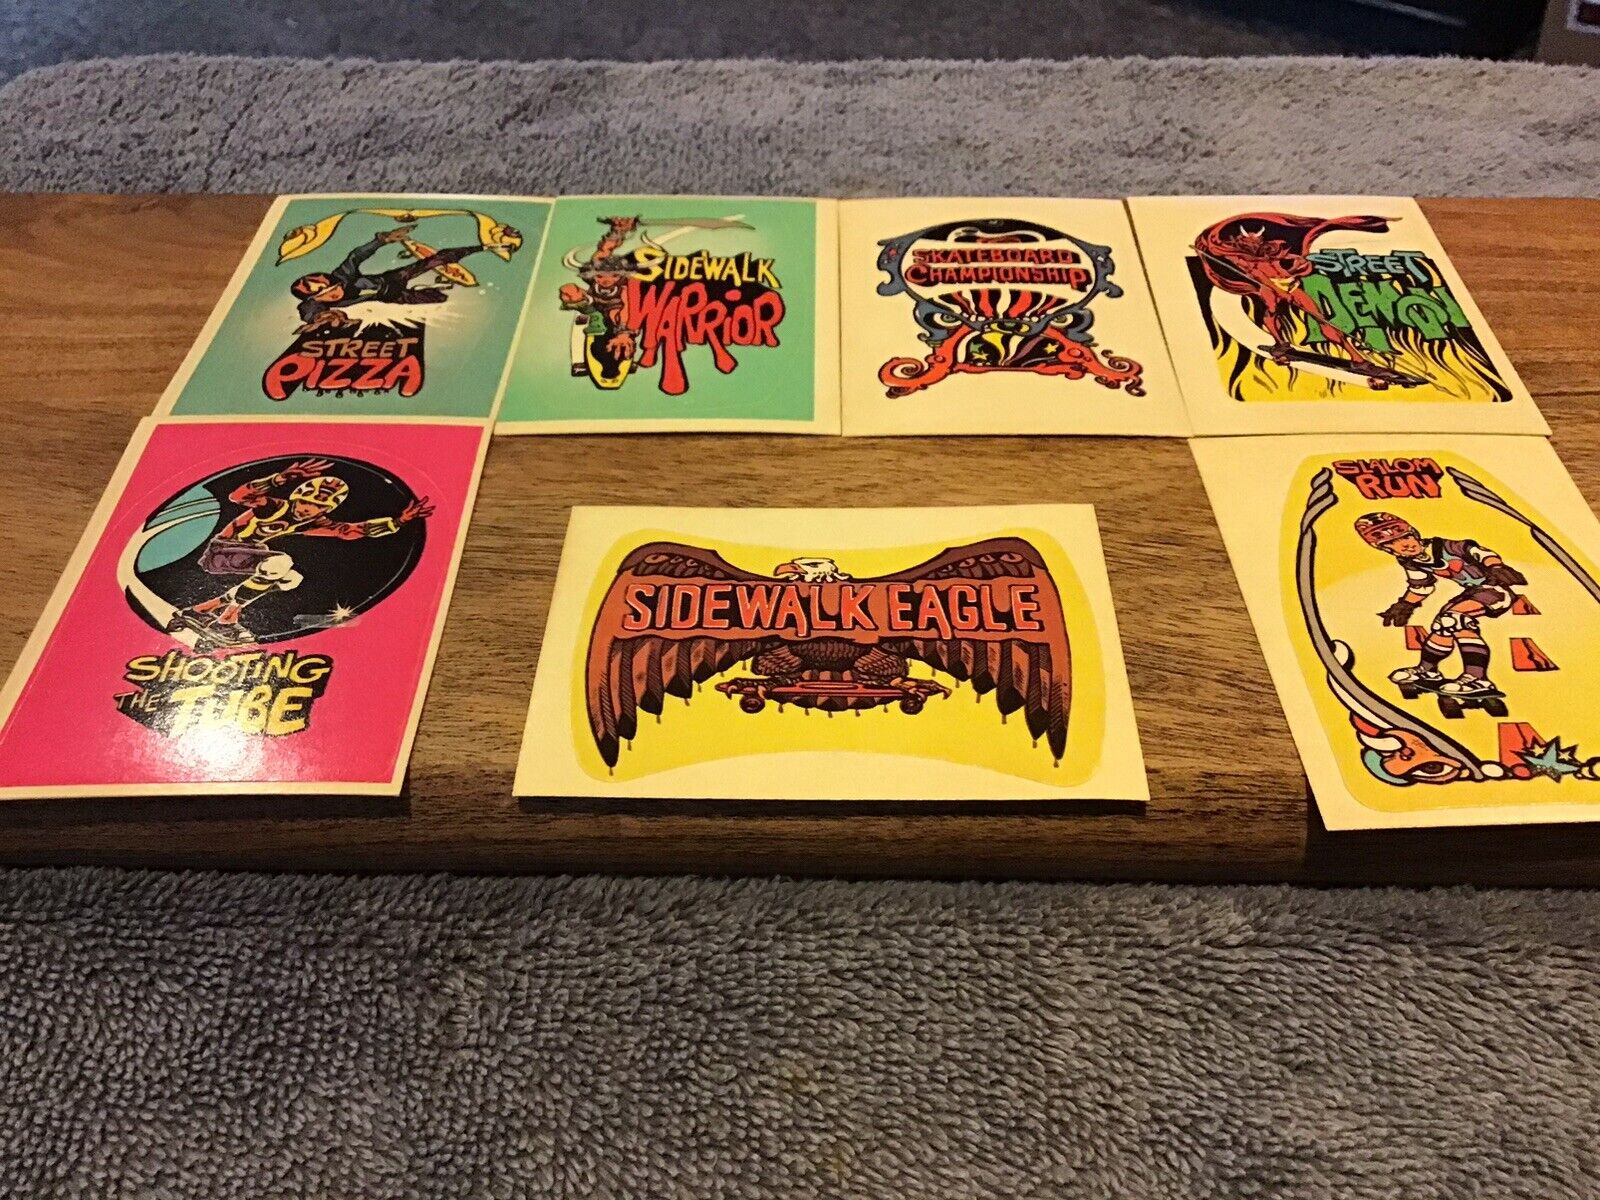 1976 Donruss Skateboard Stickers Trading Cards - Lot of 7 Stickers